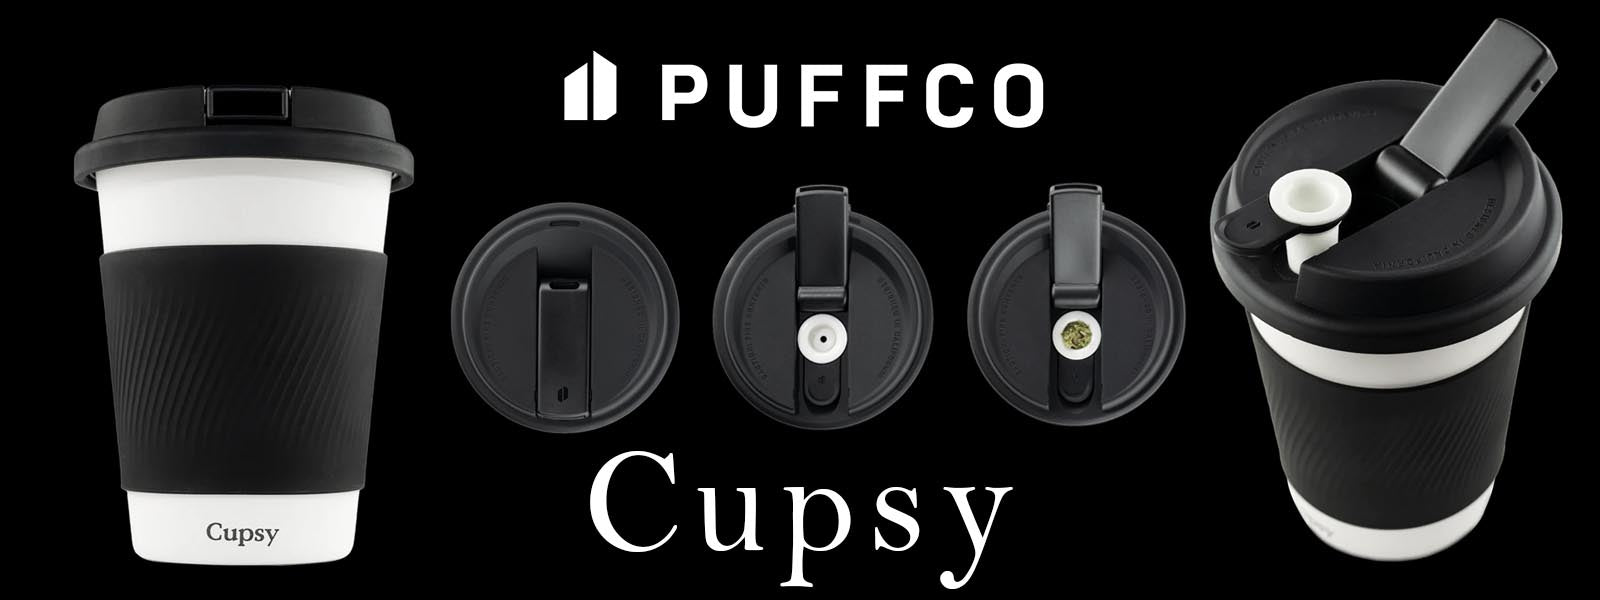 Puffco Cupsy Available At Marketplace V